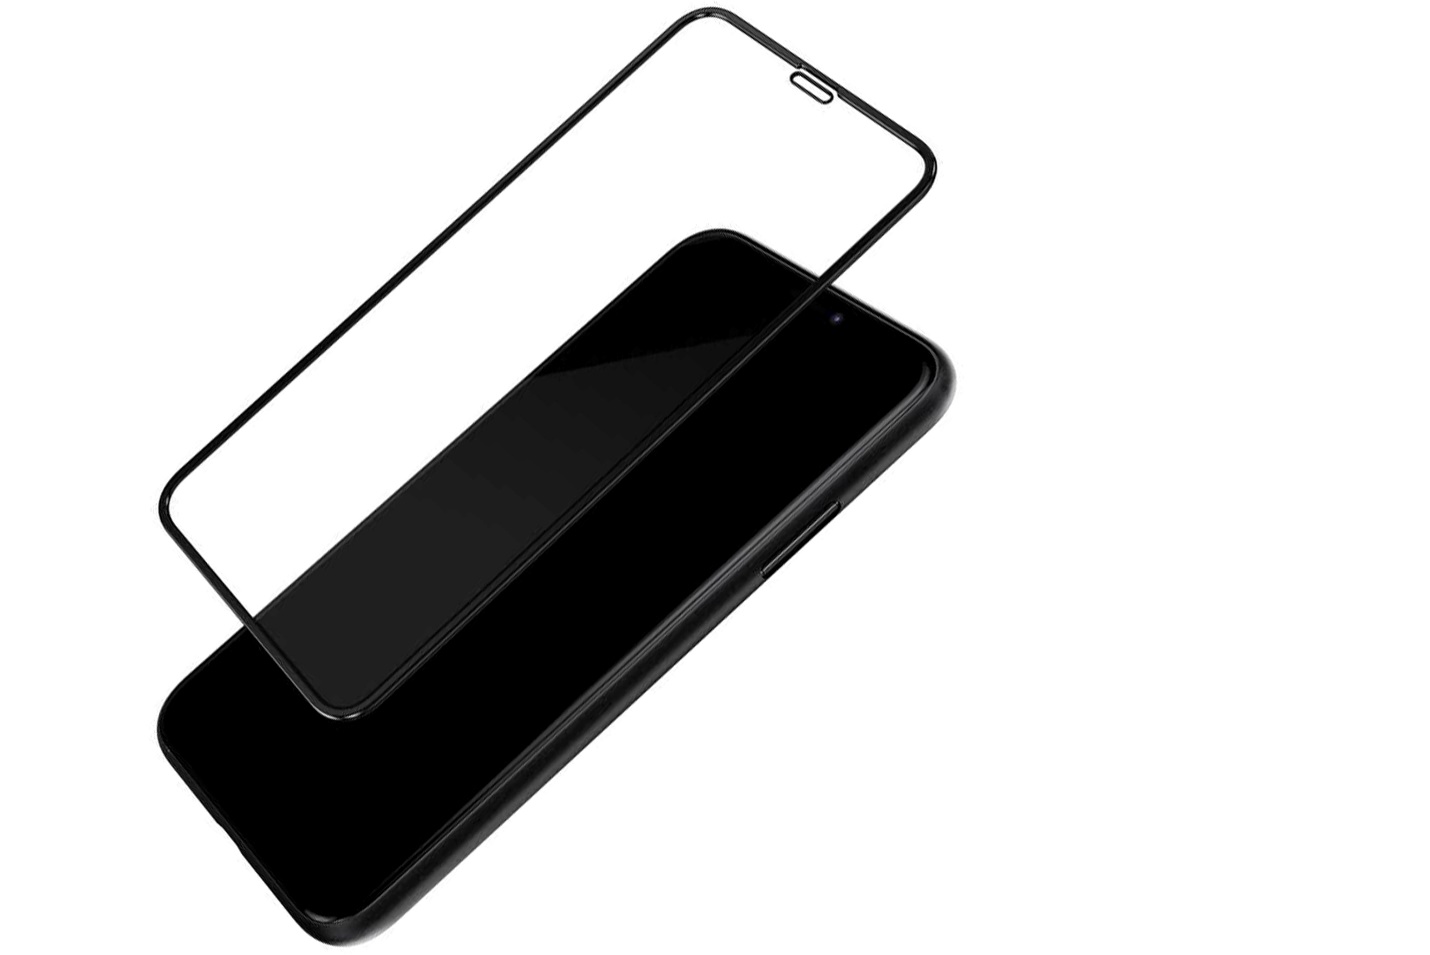 tempered glass screen protectors